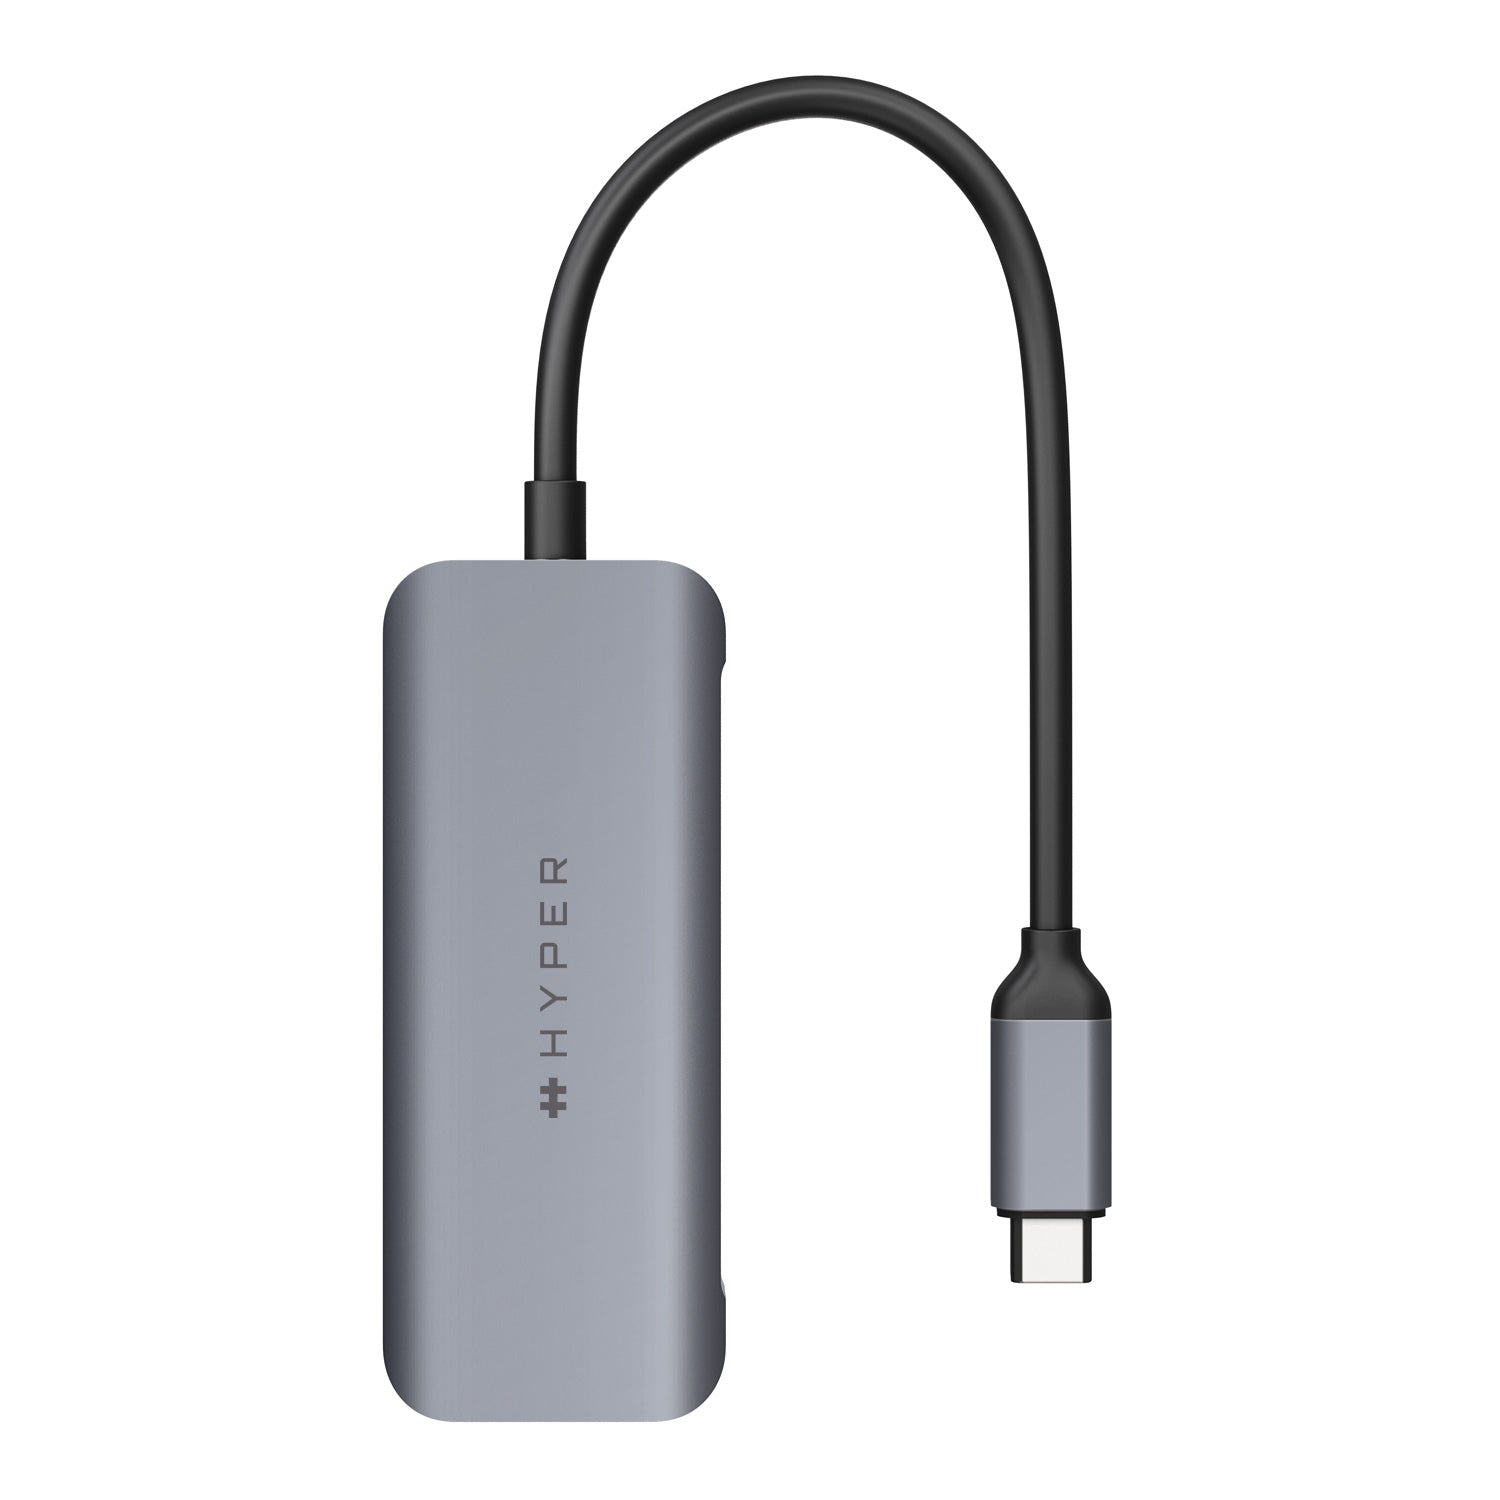 HyperDrive 4-in-1 USB-C ハブ